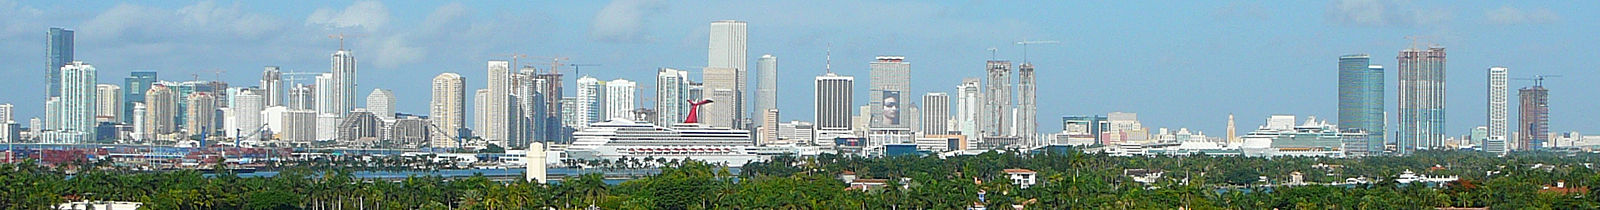 Miami skyline as seen from Miami Beach in August 2007